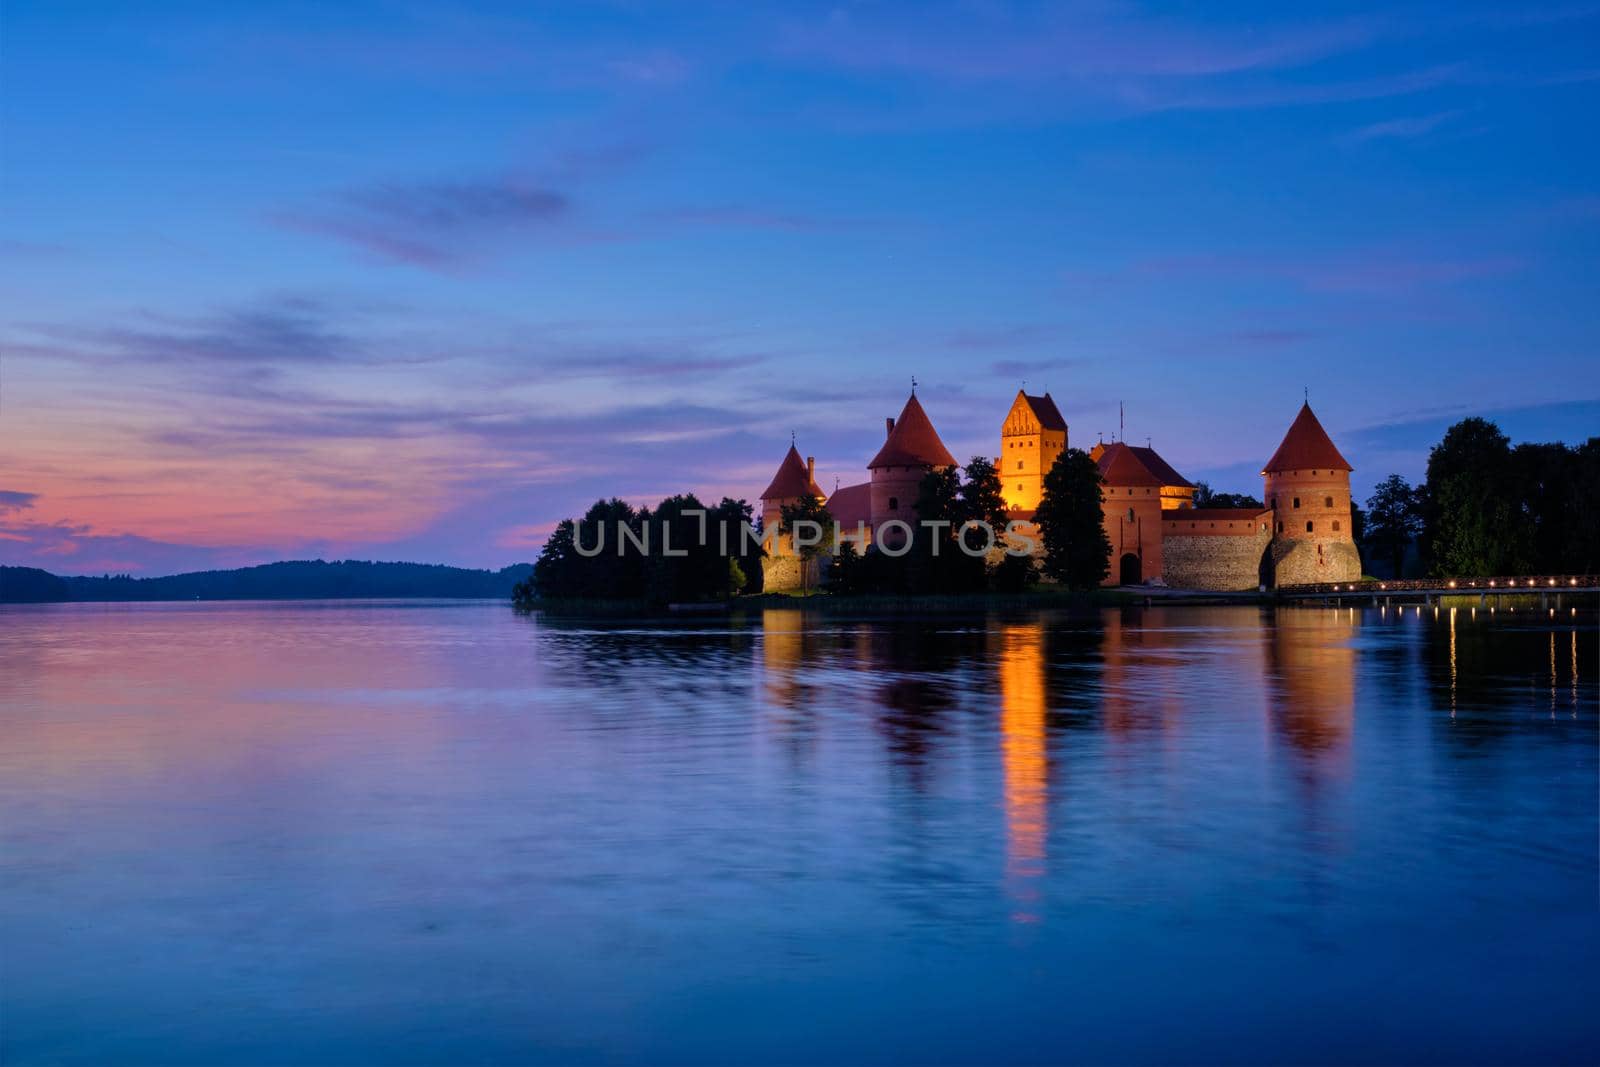 Night view of Trakai Island Castle in lake Galve illuminated in the evening, Lithuania